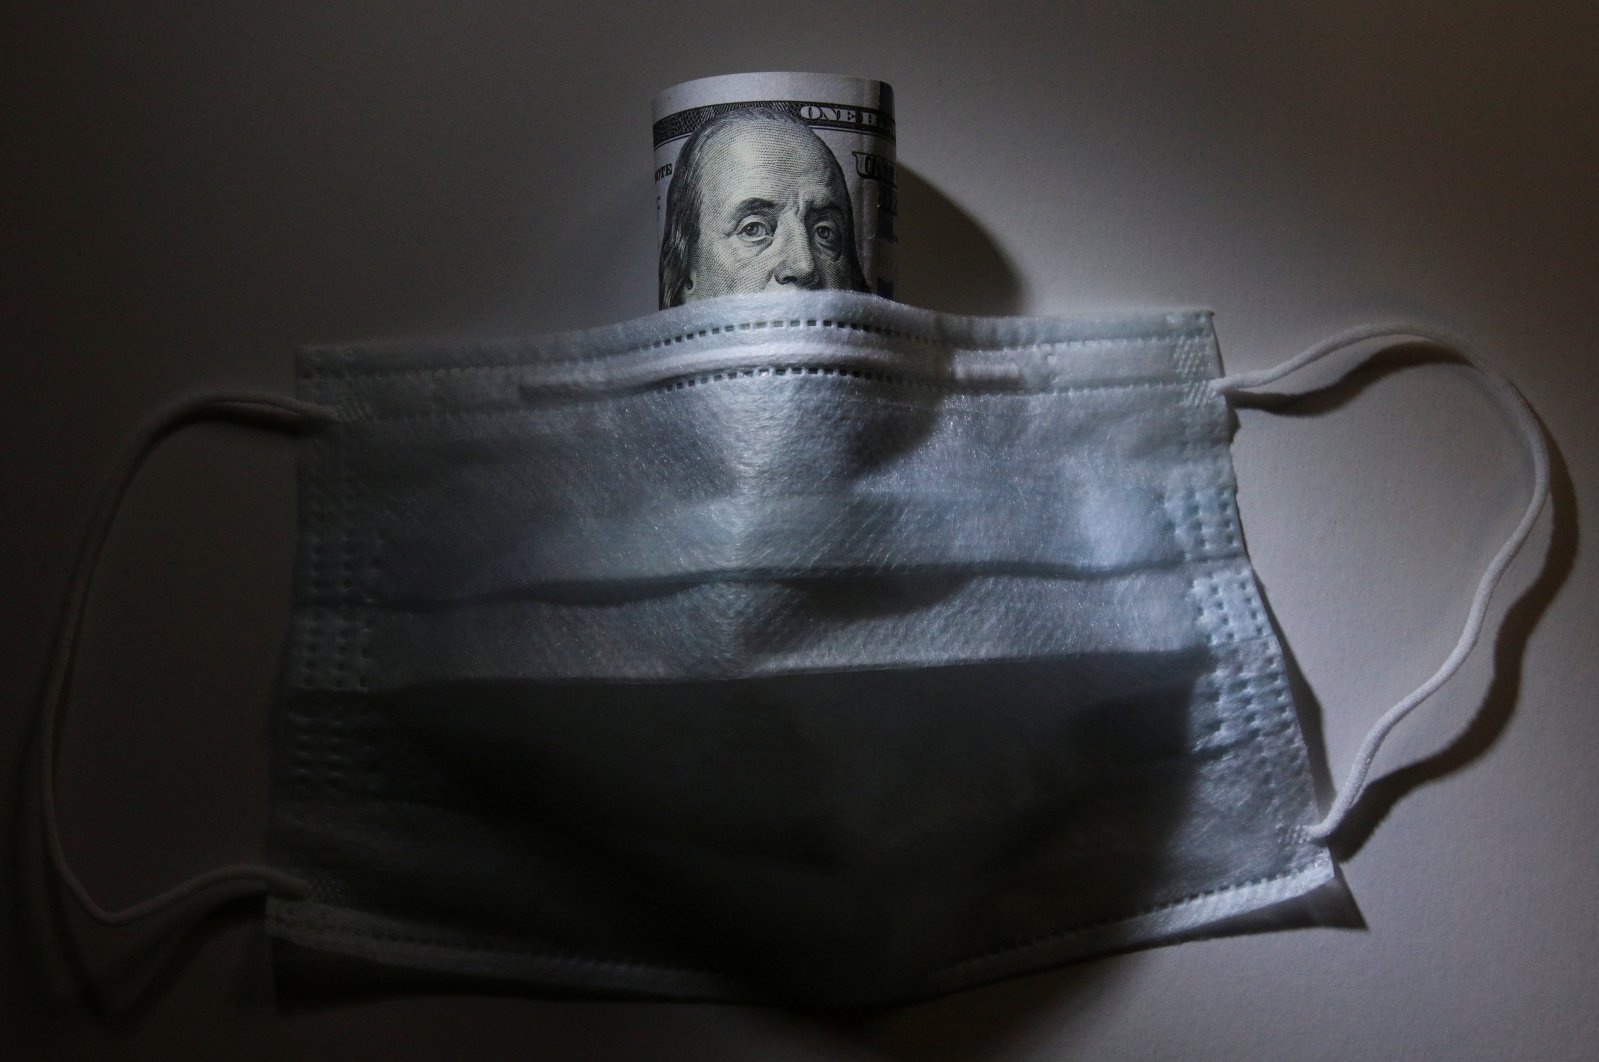 A U.S. dollar banknote is pictured behind a protective mask, a widely used preventive measure against the coronavirus, in this illustration taken Tuesday, March 17, 2020. (Reuters Photo)